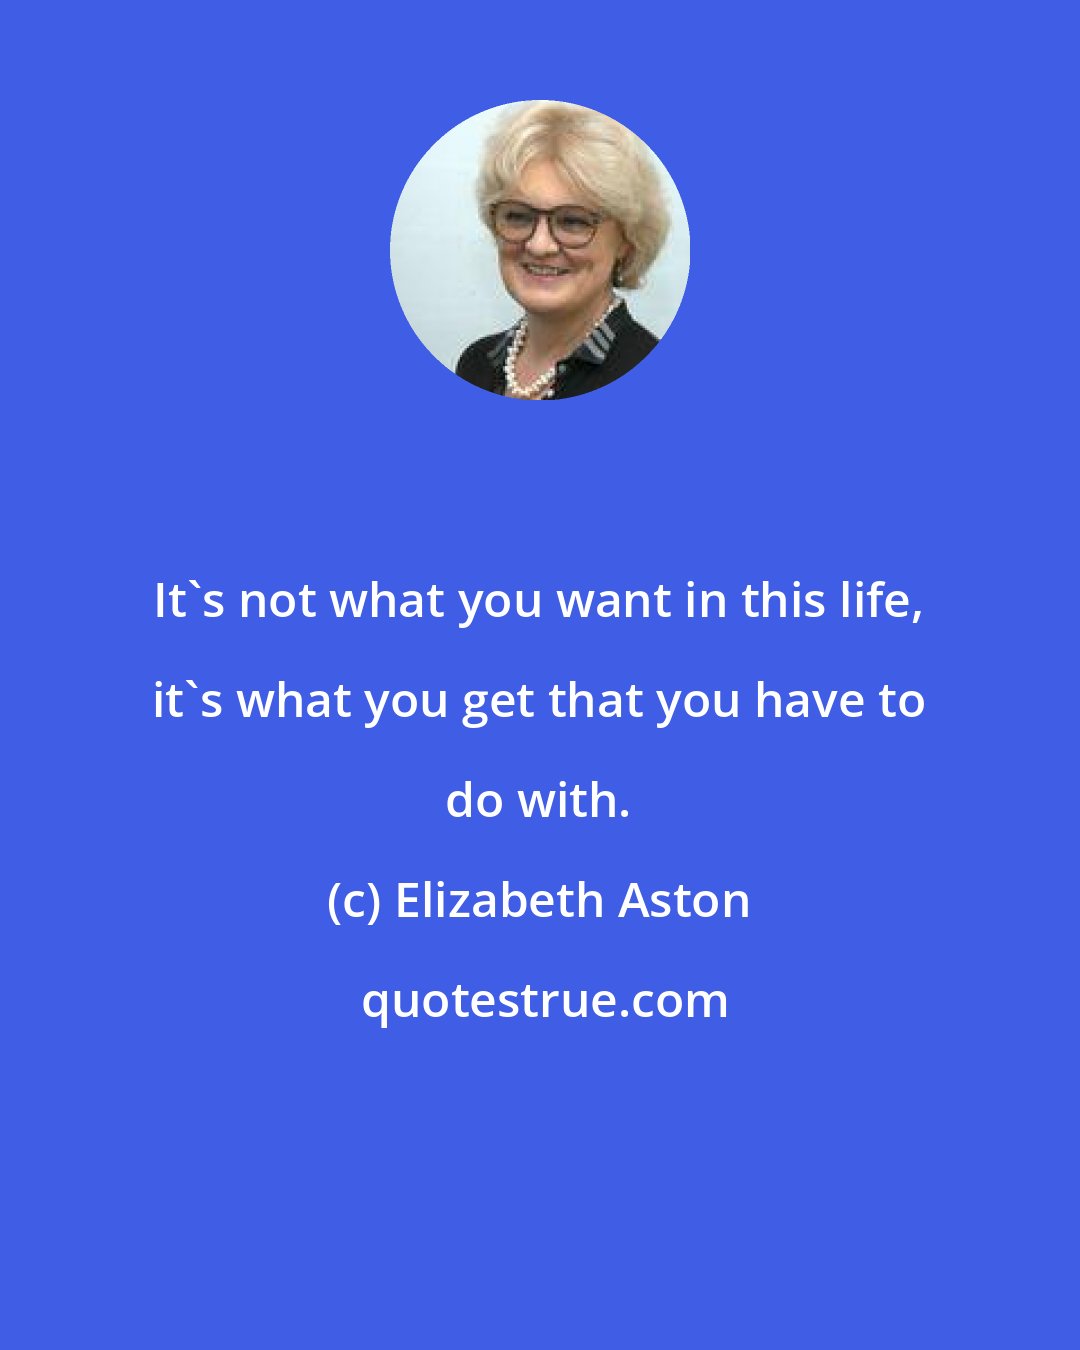 Elizabeth Aston: It's not what you want in this life, it's what you get that you have to do with.